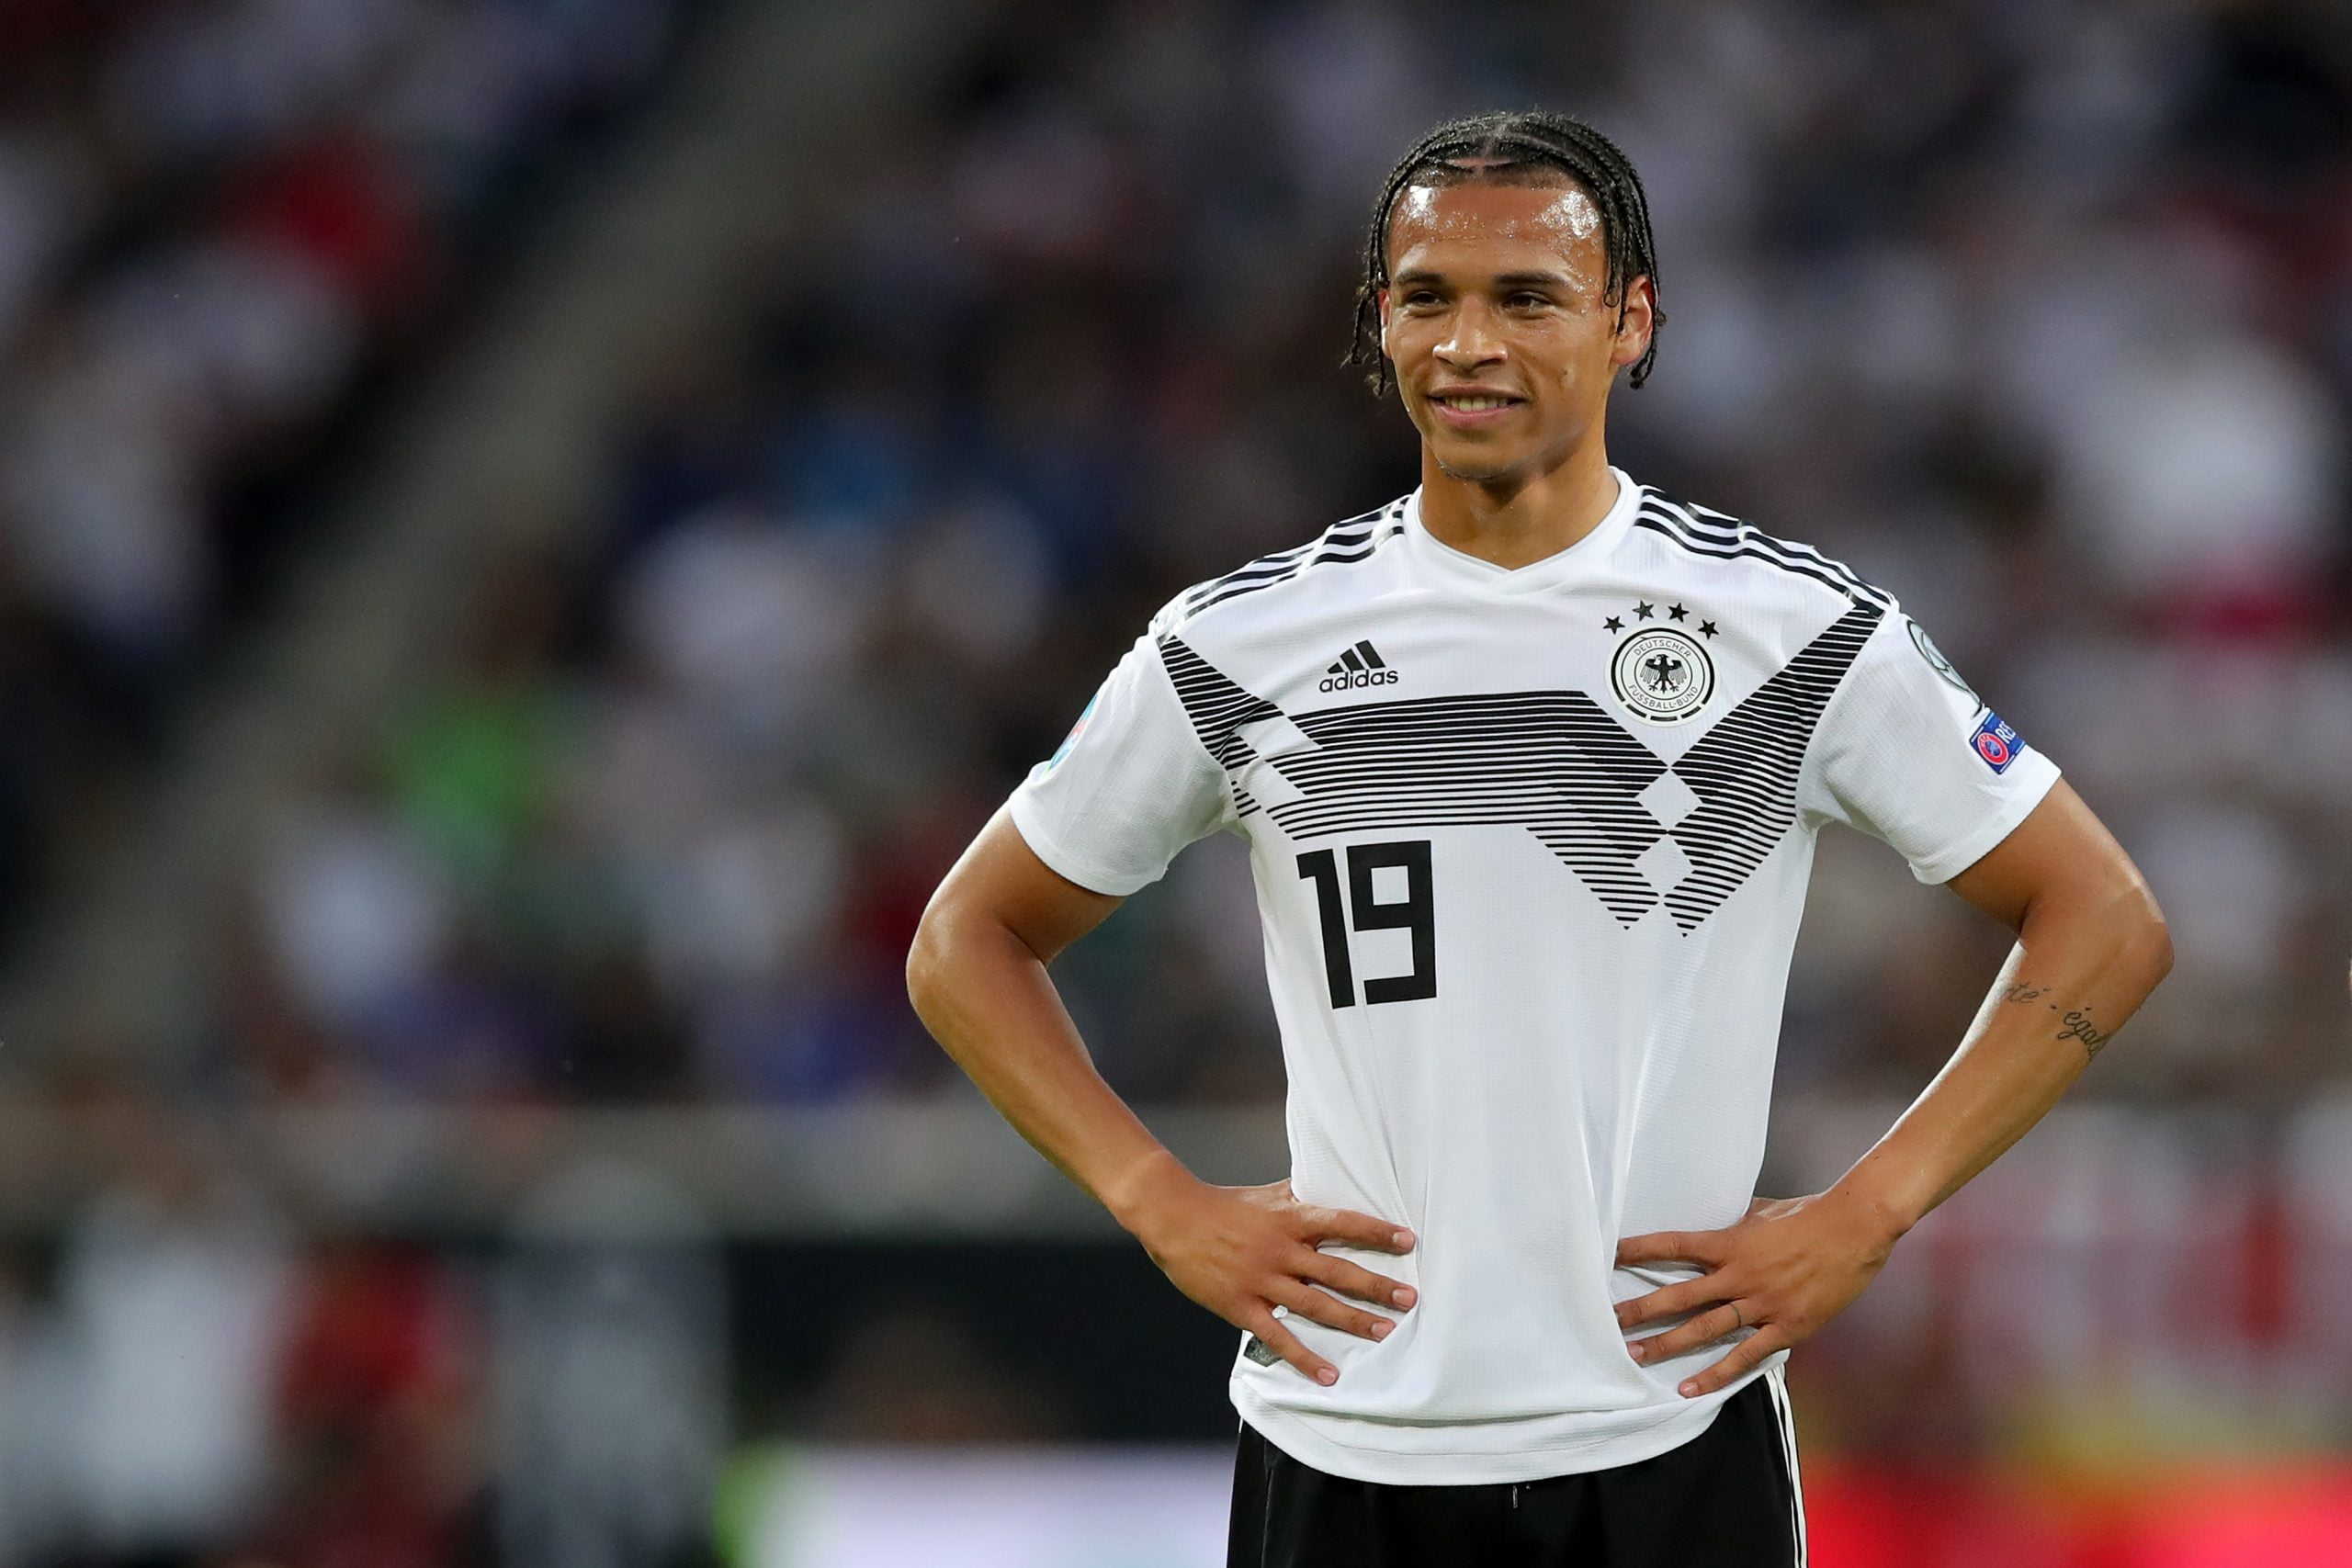 Leroy Sane of Germany smiles during the UEFA Euro 2020 Qualifier match between Germany and Estonia at Opel Arena on June 11, 2019 in Mainz, Germany. (Photo by Alexander Hassenstein/Bongarts/Getty Images)